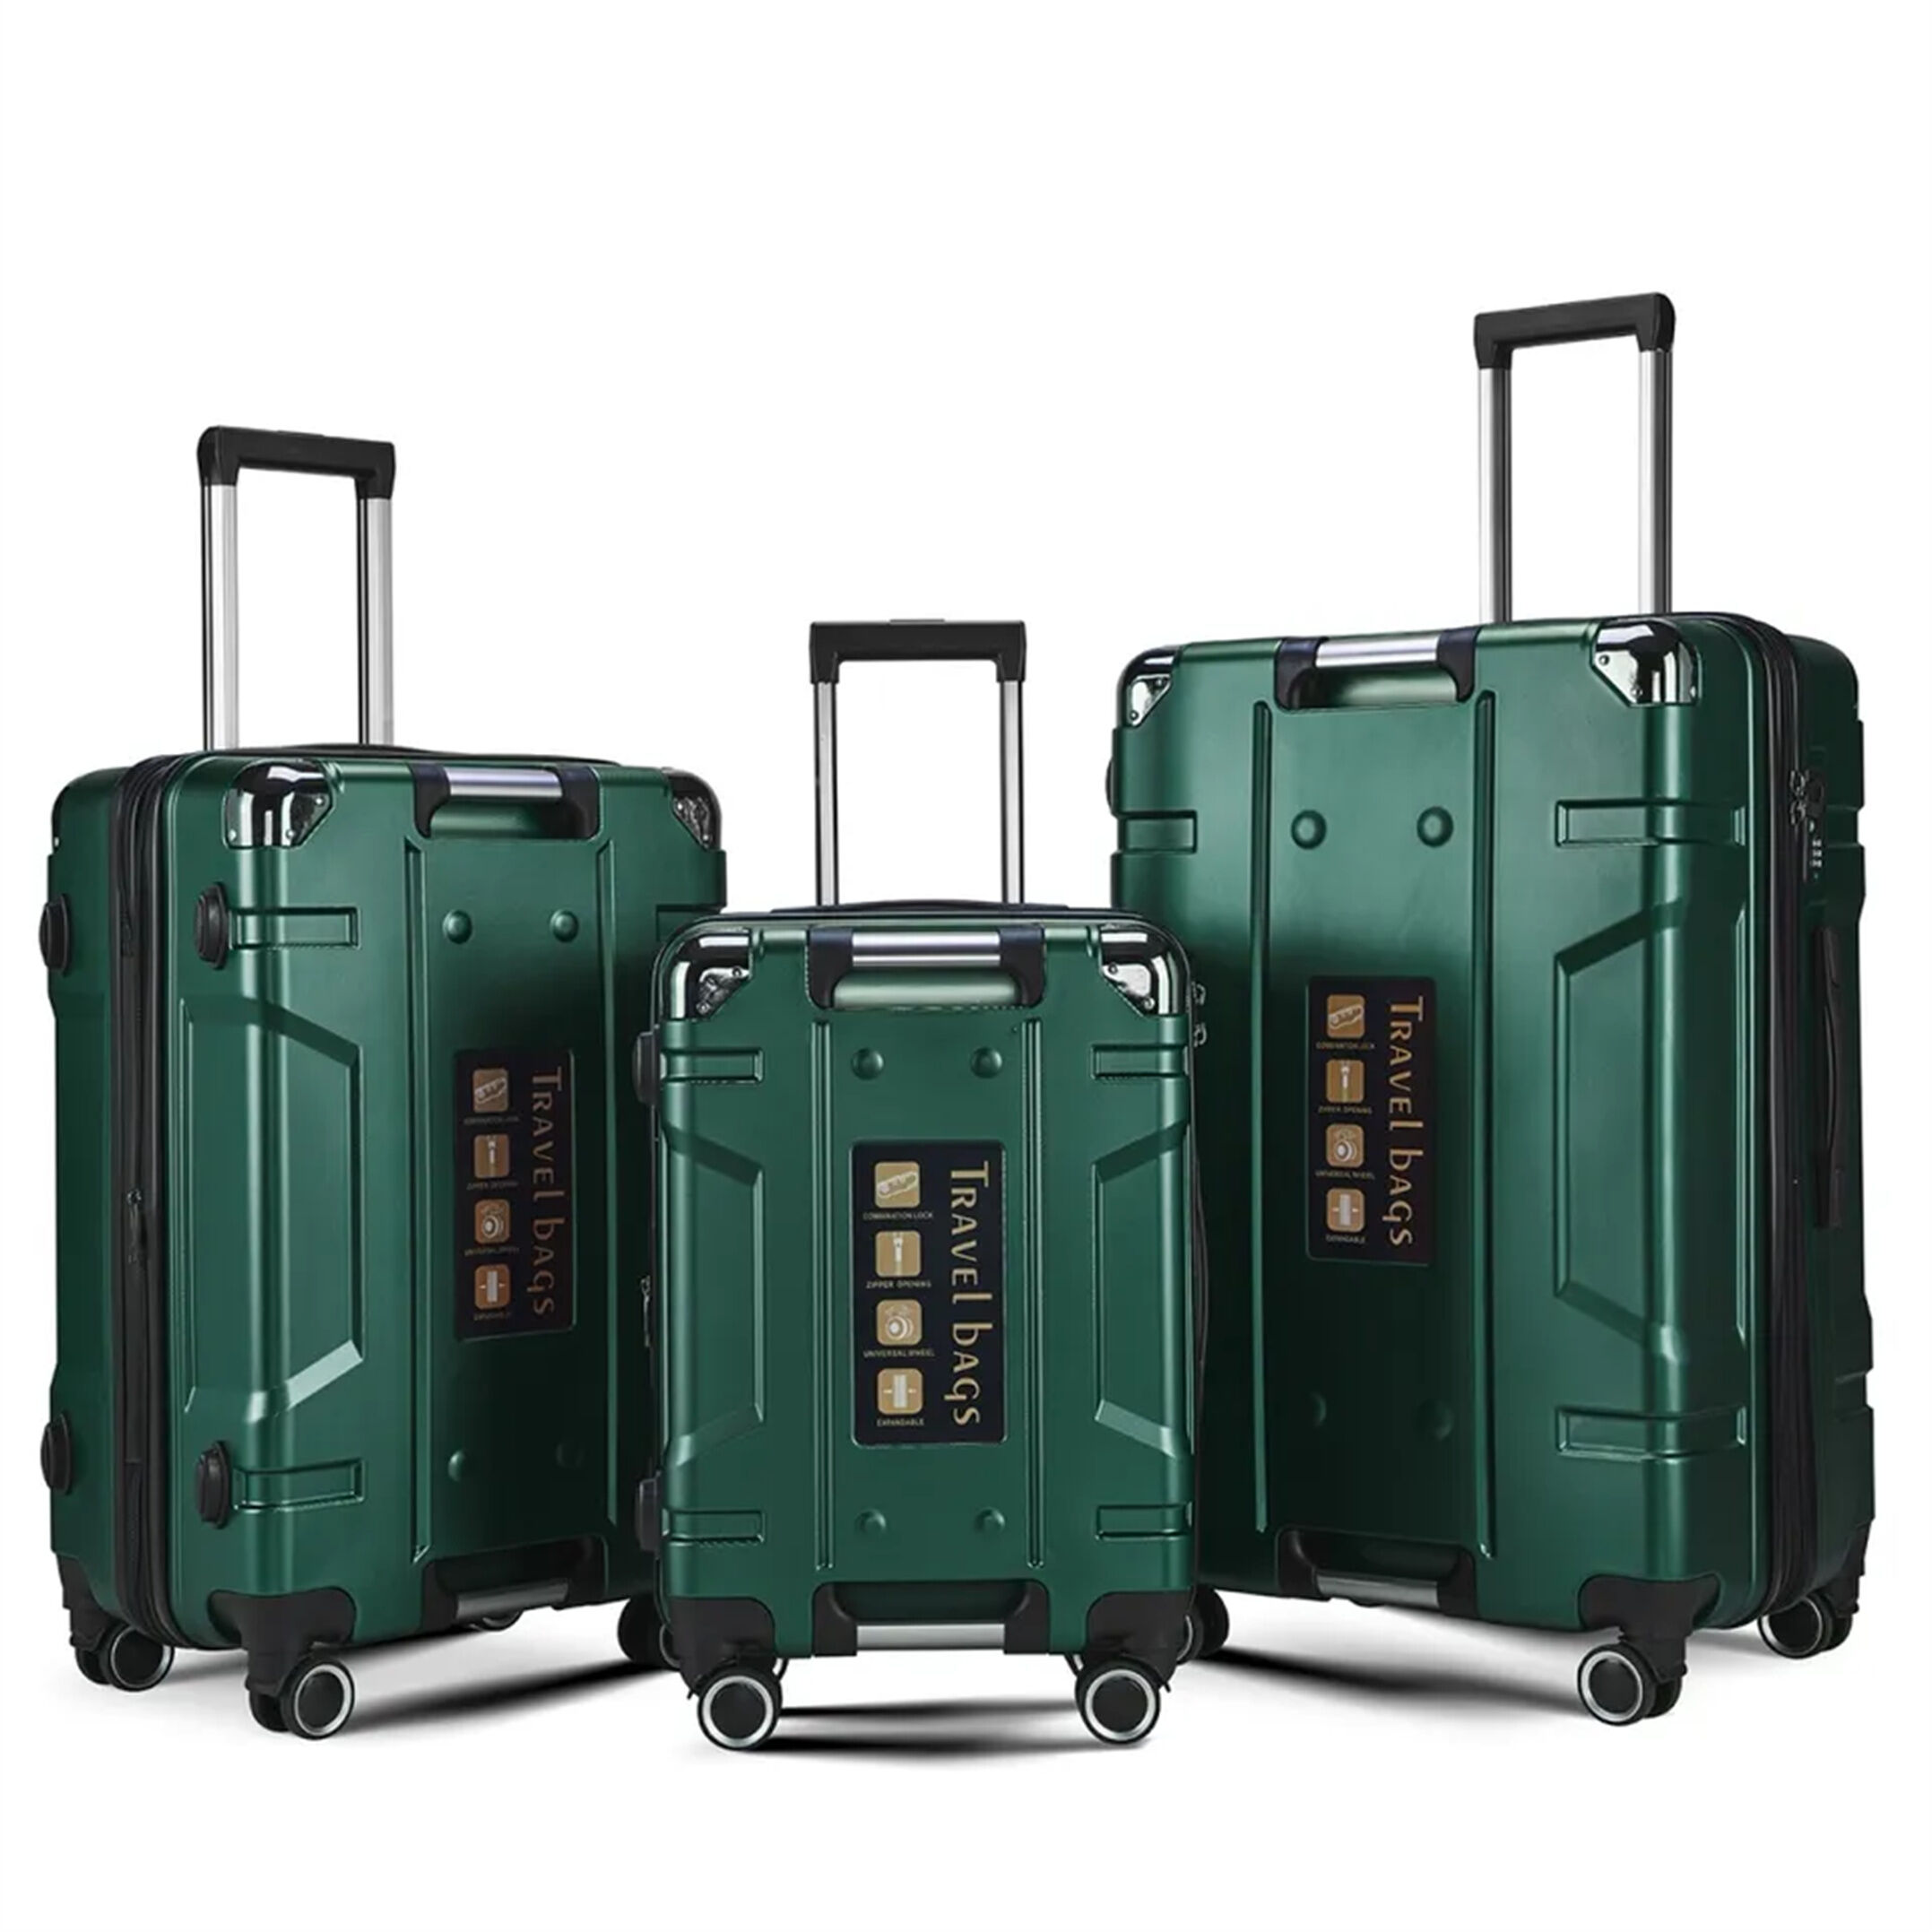 Double Wheels Soft Nylon Trolley Bag Luggage Factory Price - China Trolley  Soft Luggage and Travel Trolley Bag price